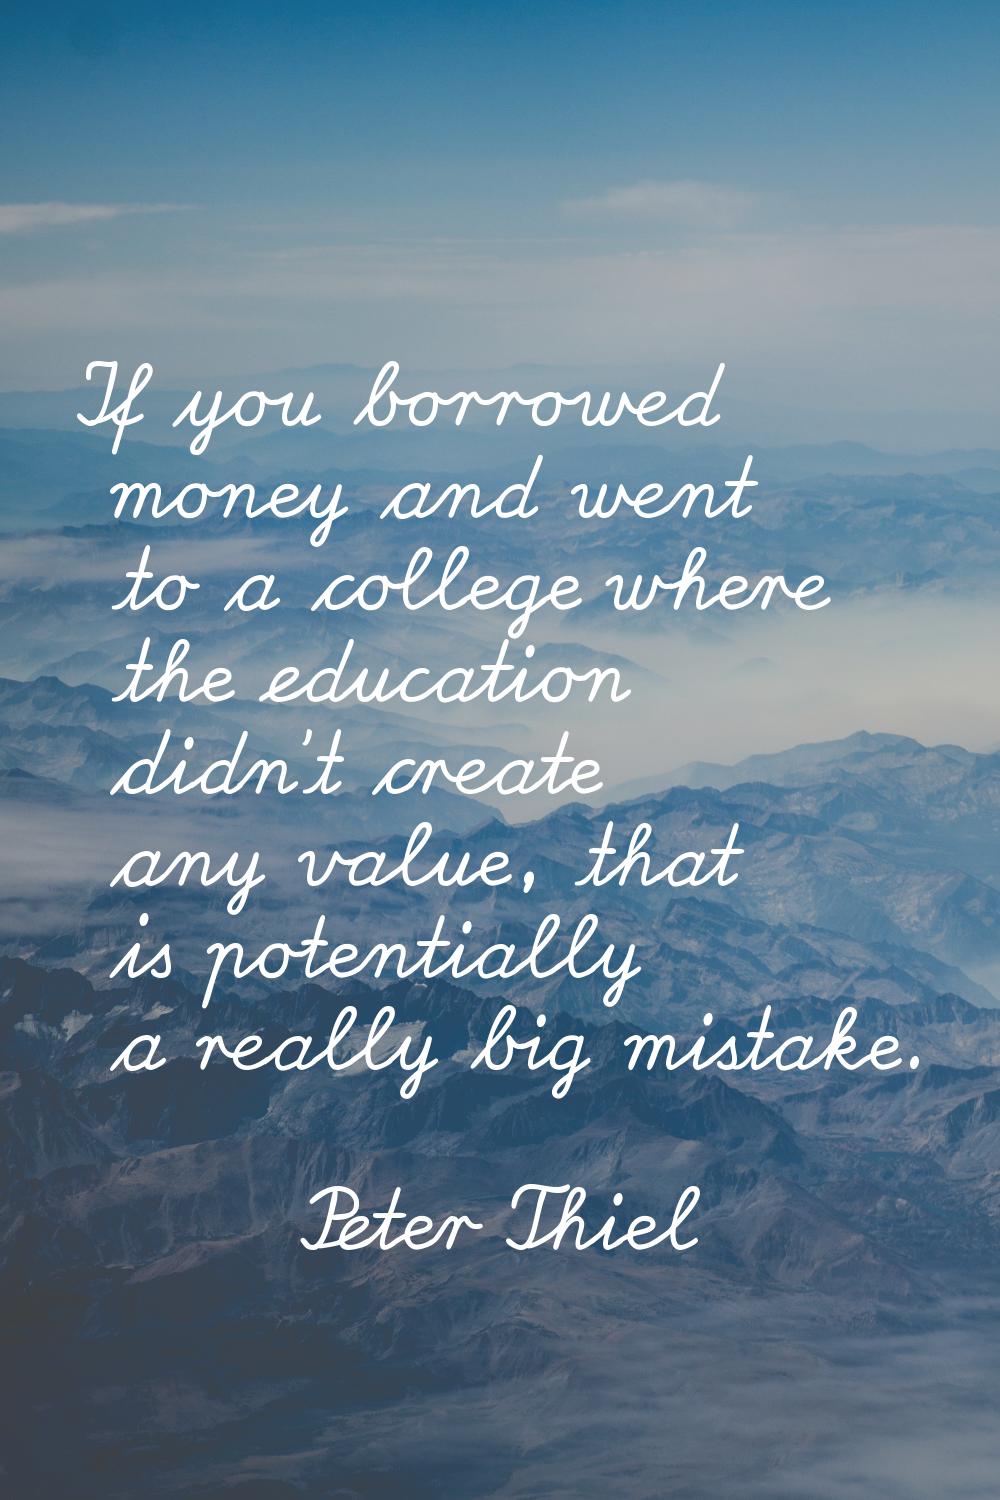 If you borrowed money and went to a college where the education didn't create any value, that is po